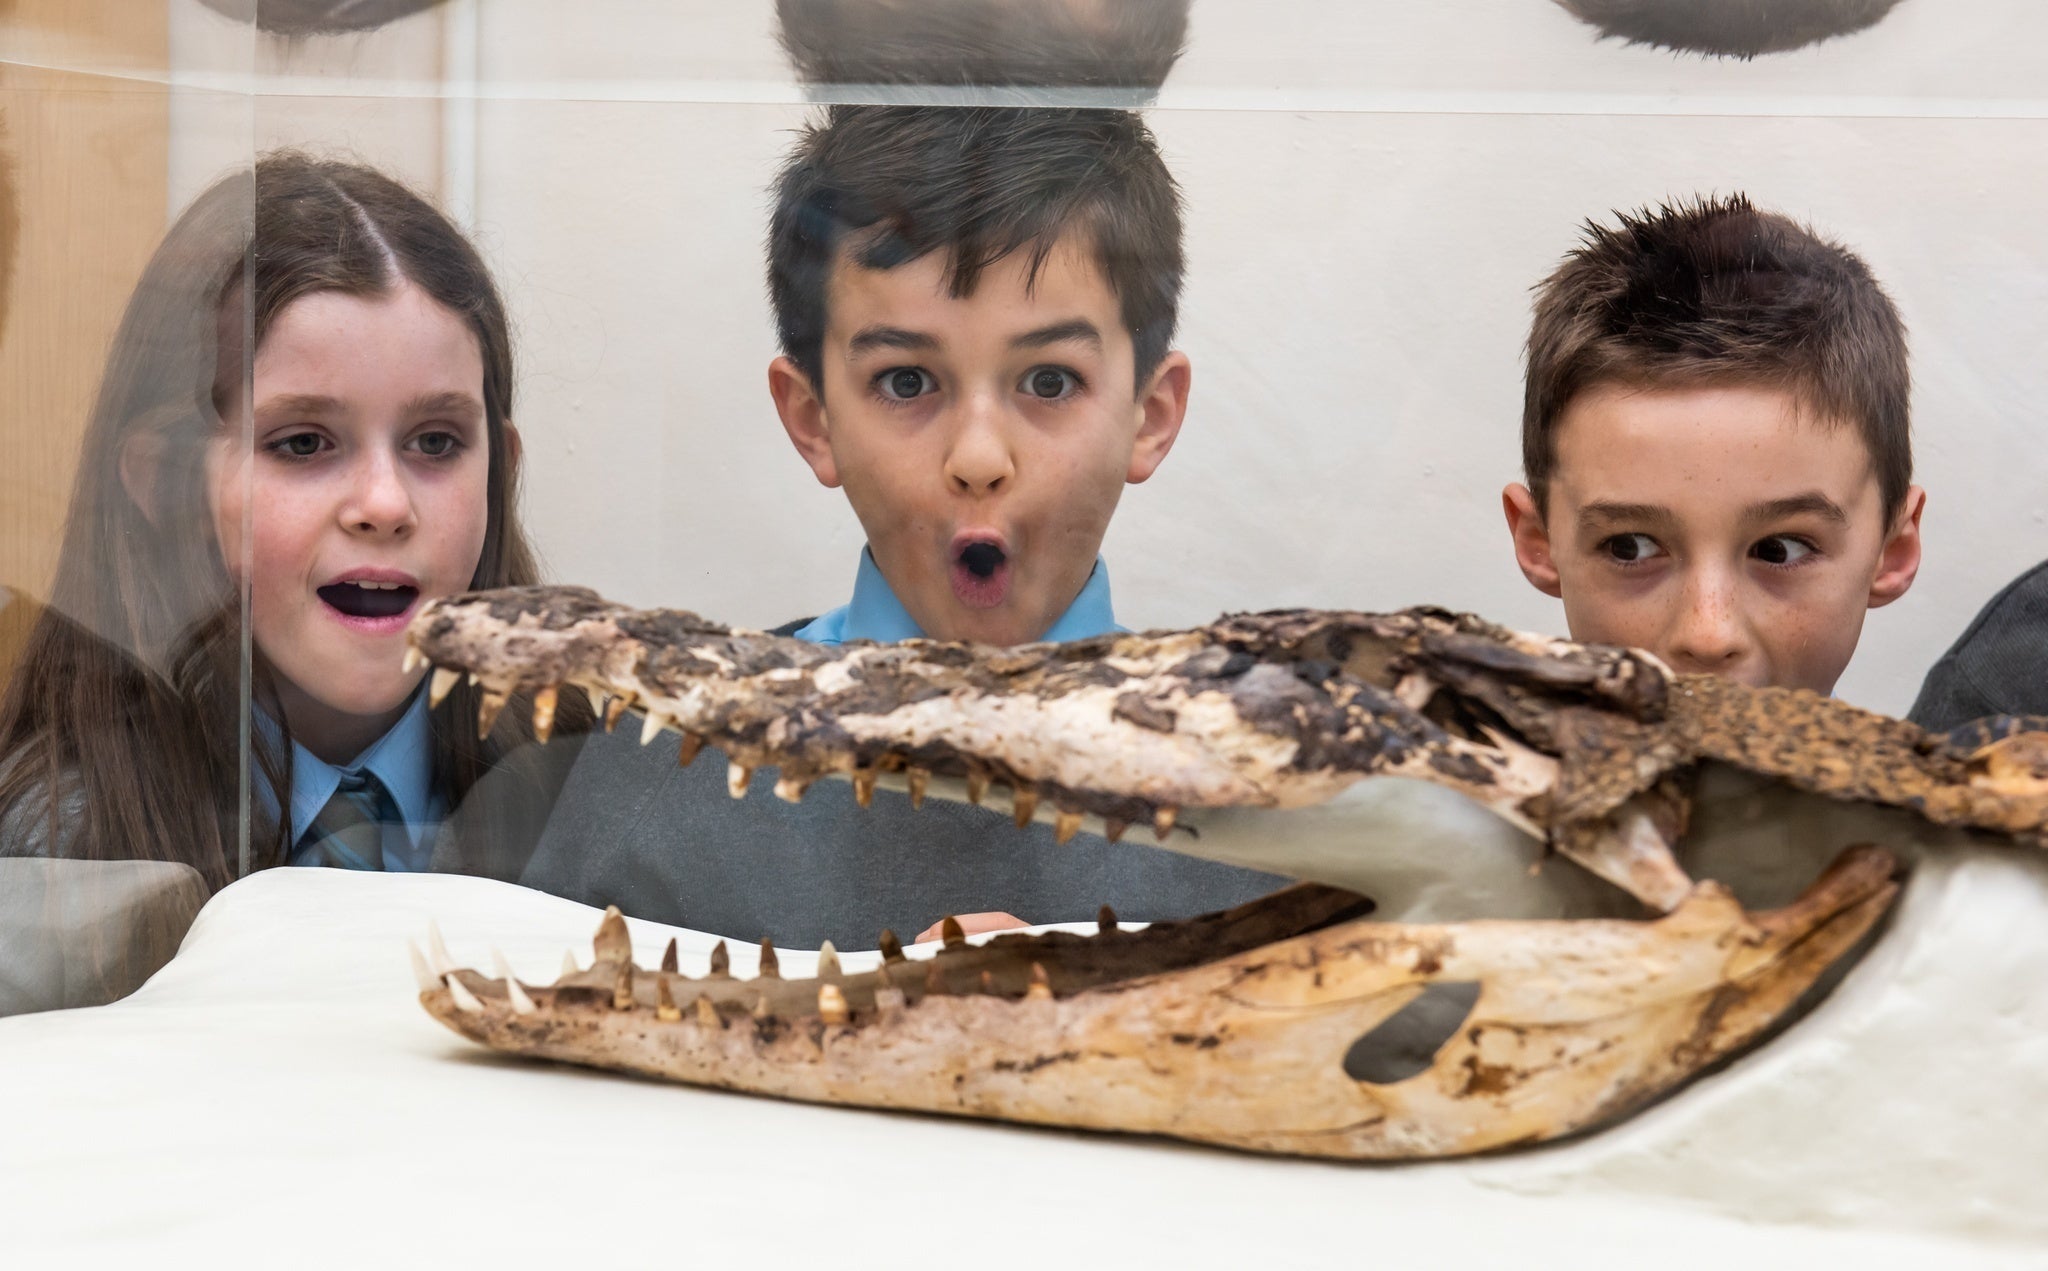 The meticulously conserved crocodile has been put on display at a Rhondda primary school for everyone to enjoy (Rhondda Cynon Taf Council/PA)